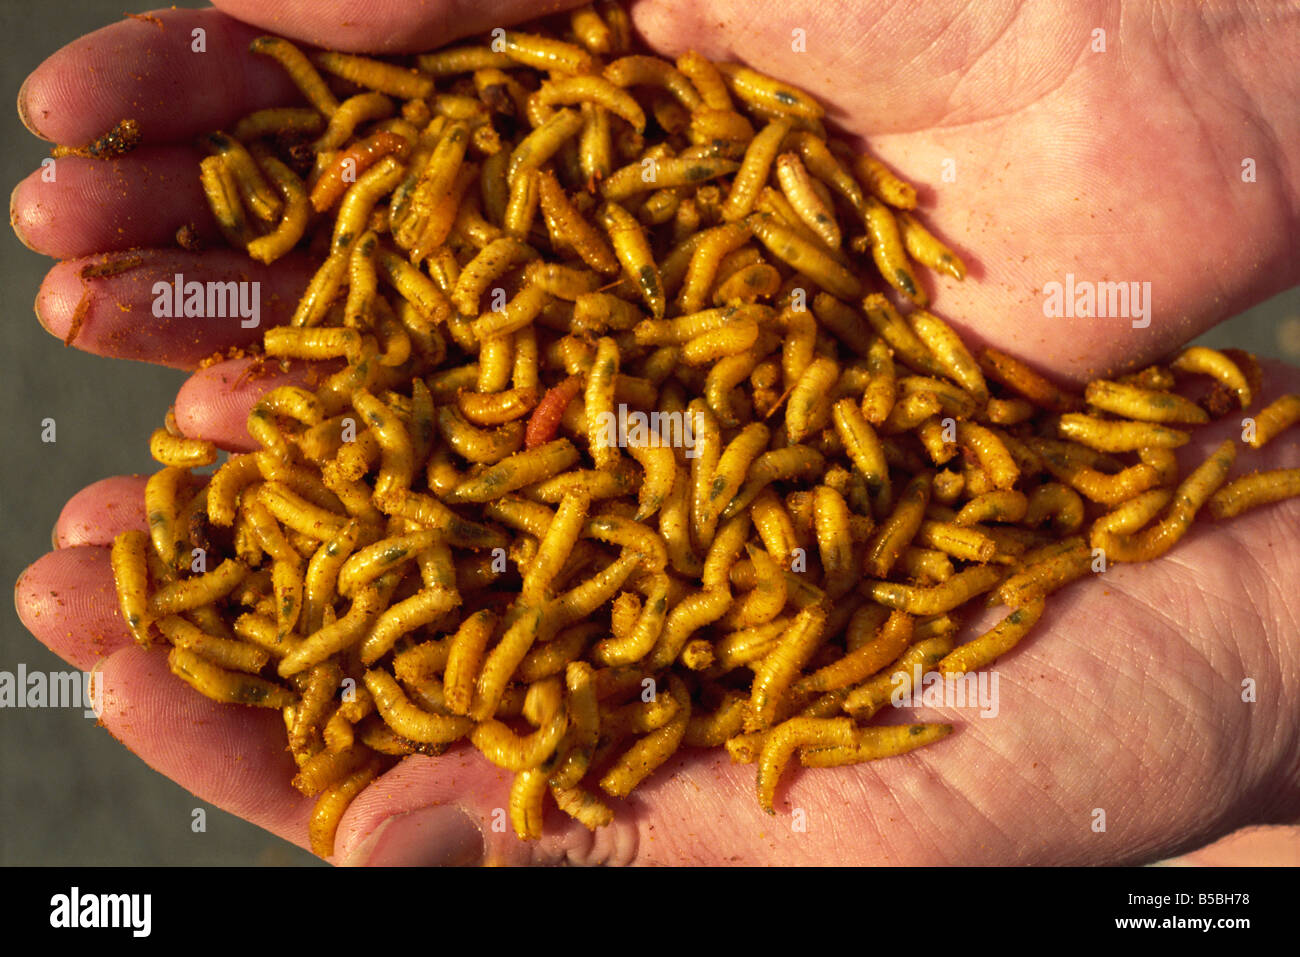 Maggots for fishing bait, bred on maggot farm, dyed yellow by dye added to offal feed, Nottingham, Nottinghamshire, England, UK Stock Photo